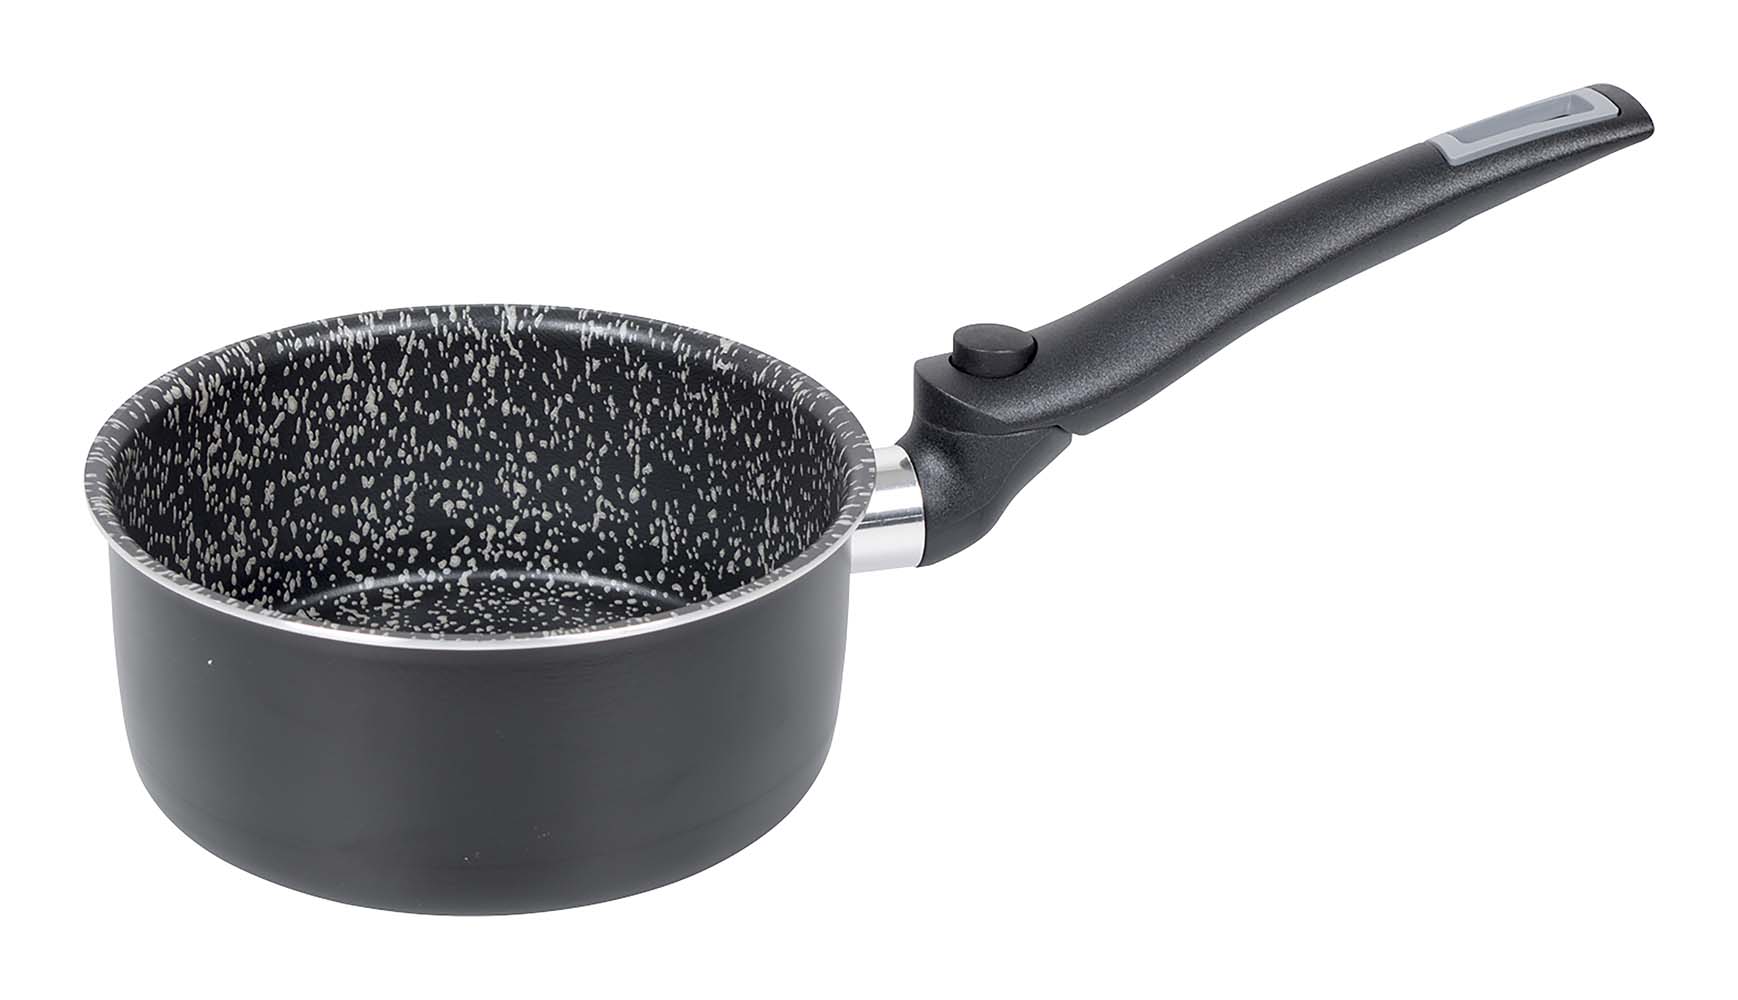 2304420 An aluminium saucepan with foldaway handle. Comes with a 5 layer Salus Stone coating and an anti-slip base. This pan has a foldaway handle and therefore makes good use of space and is easy to take with you. Thickness: 2.5 millimetres.